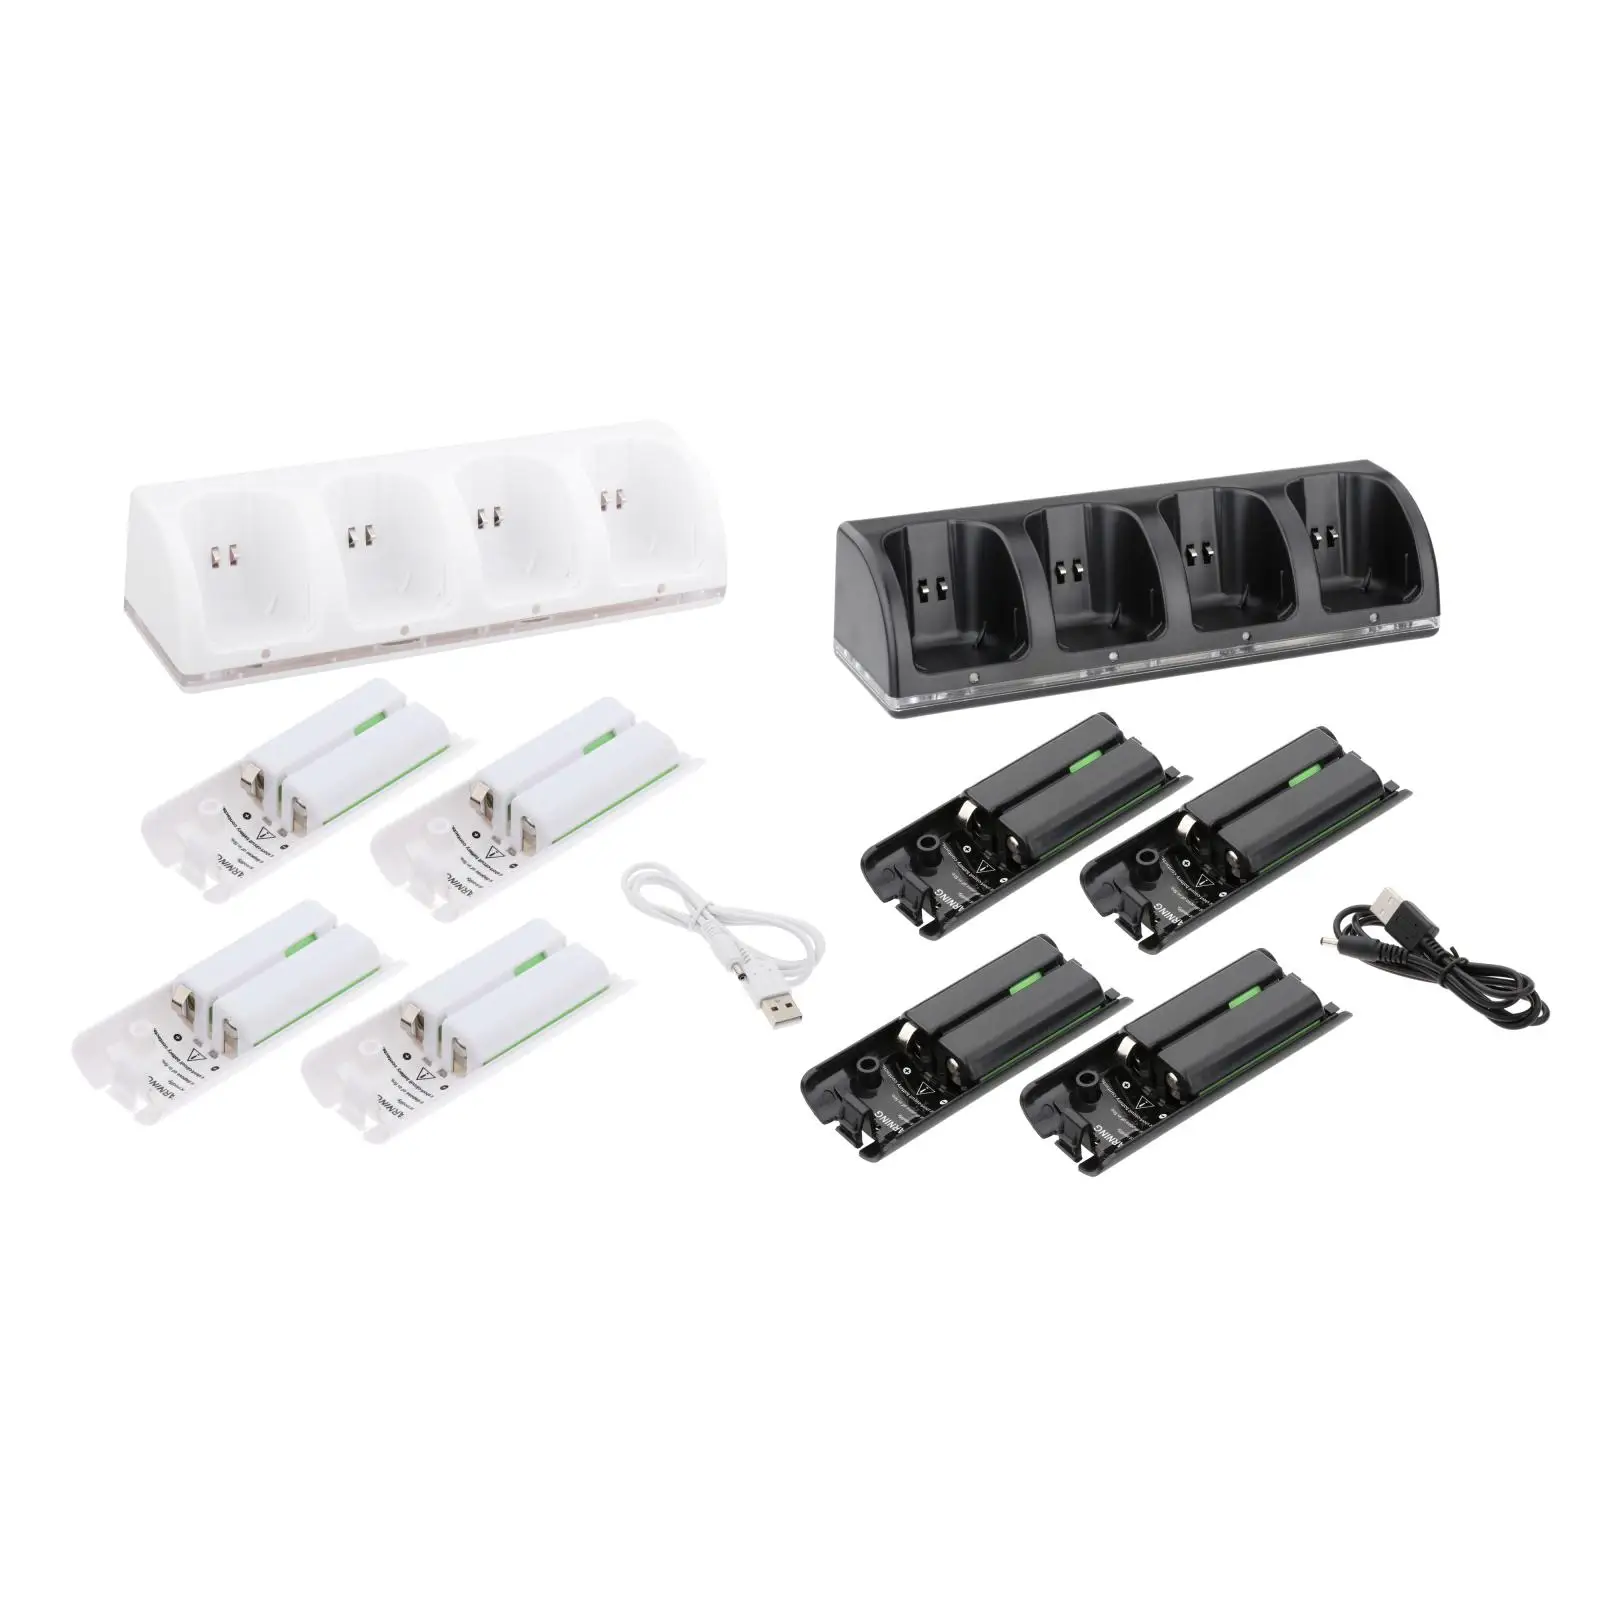 Charging Dock Station with 4 Rechargeable Batteries and USB Cable, 4 in 1 Battery Charger for Wii Controller Game Accessories